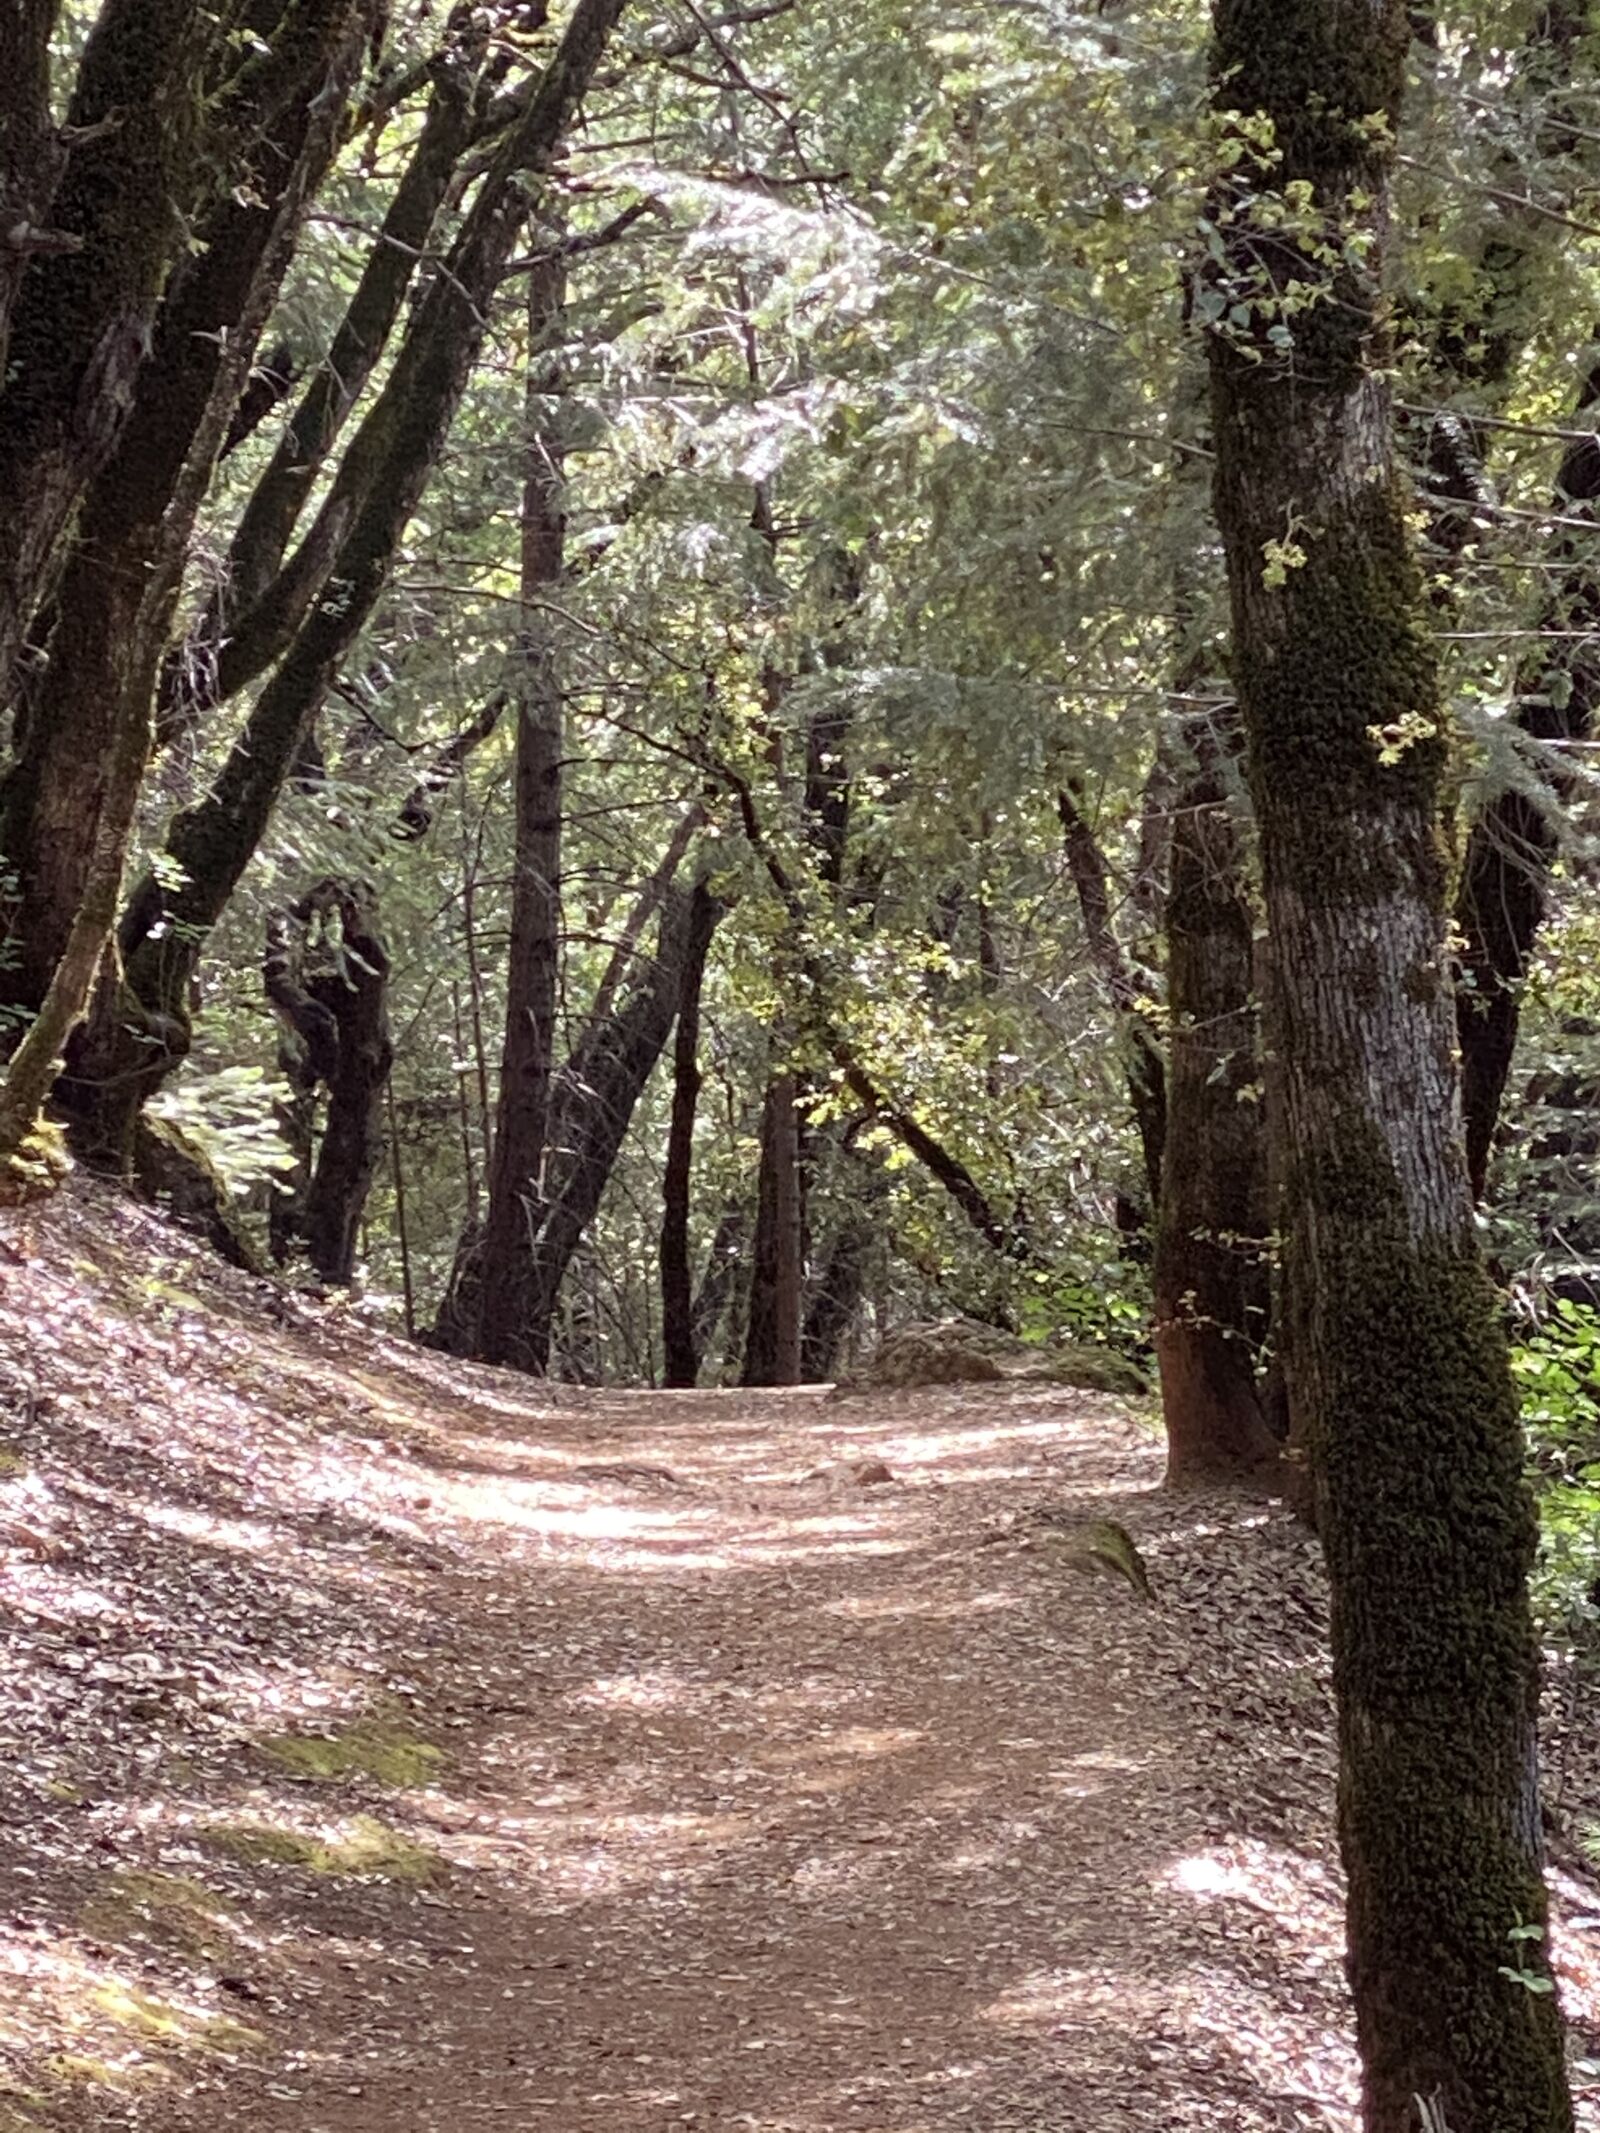 iPhone 11 Pro Max back triple camera 6mm f/2 sample photo. Forest, path, mystical photography